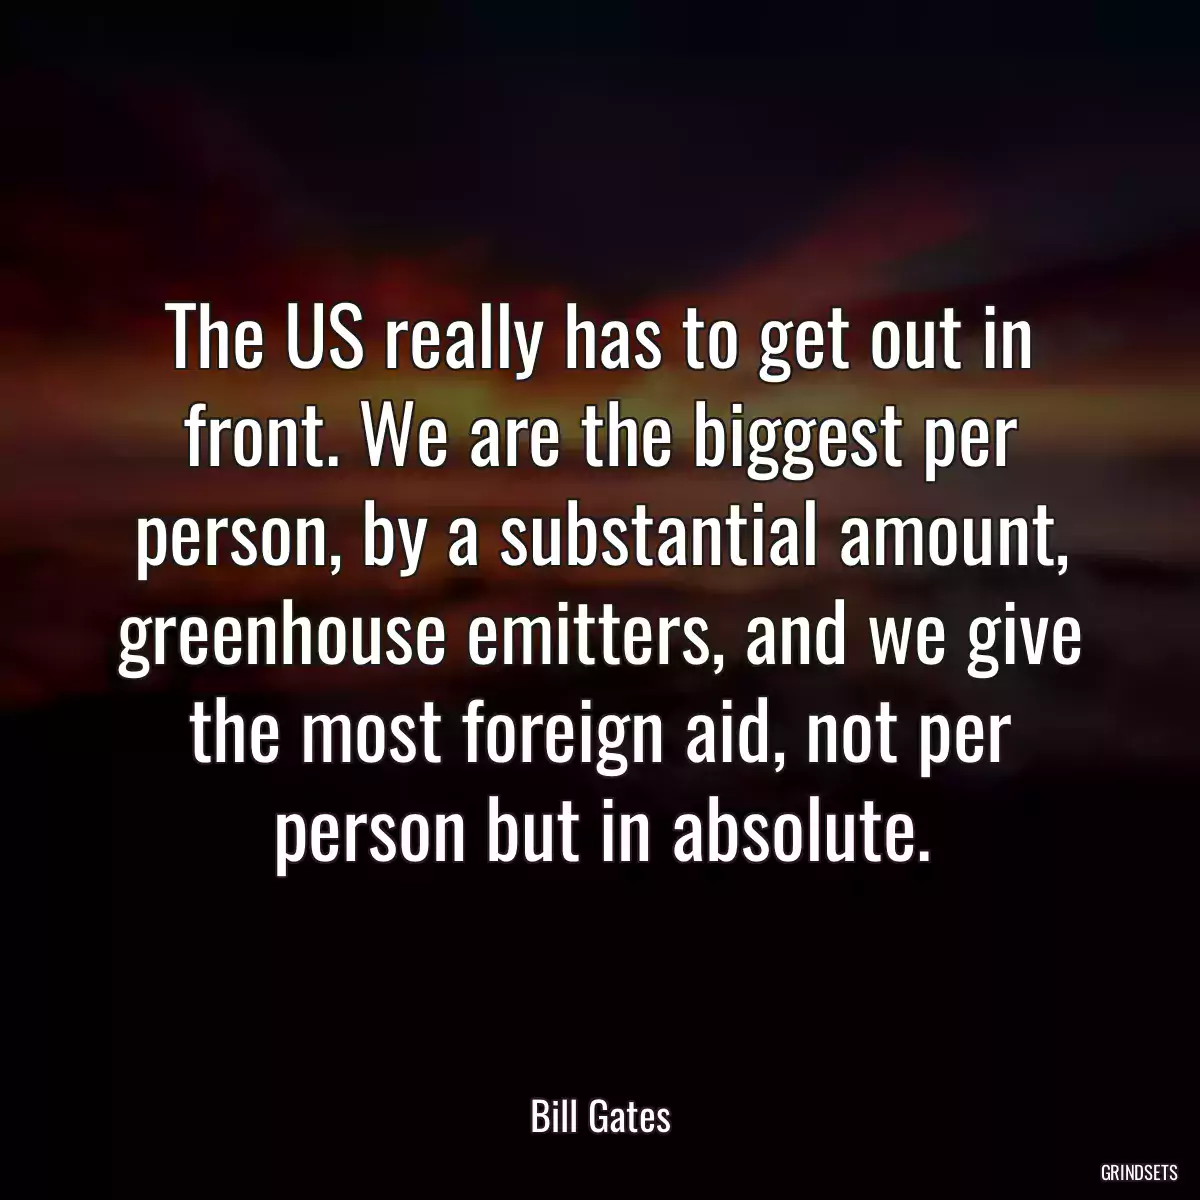 The US really has to get out in front. We are the biggest per person, by a substantial amount, greenhouse emitters, and we give the most foreign aid, not per person but in absolute.